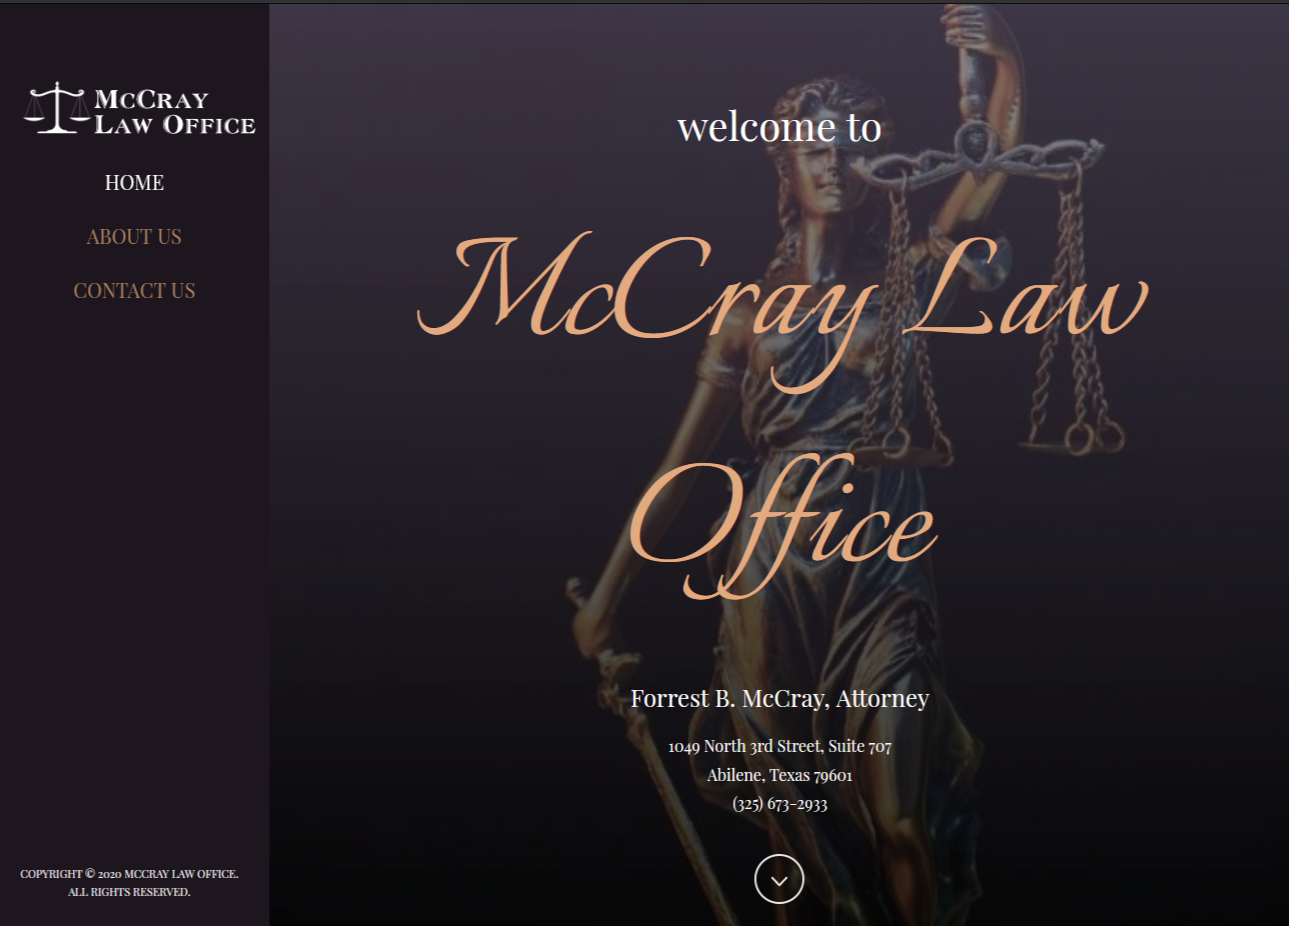 McCray Law Office